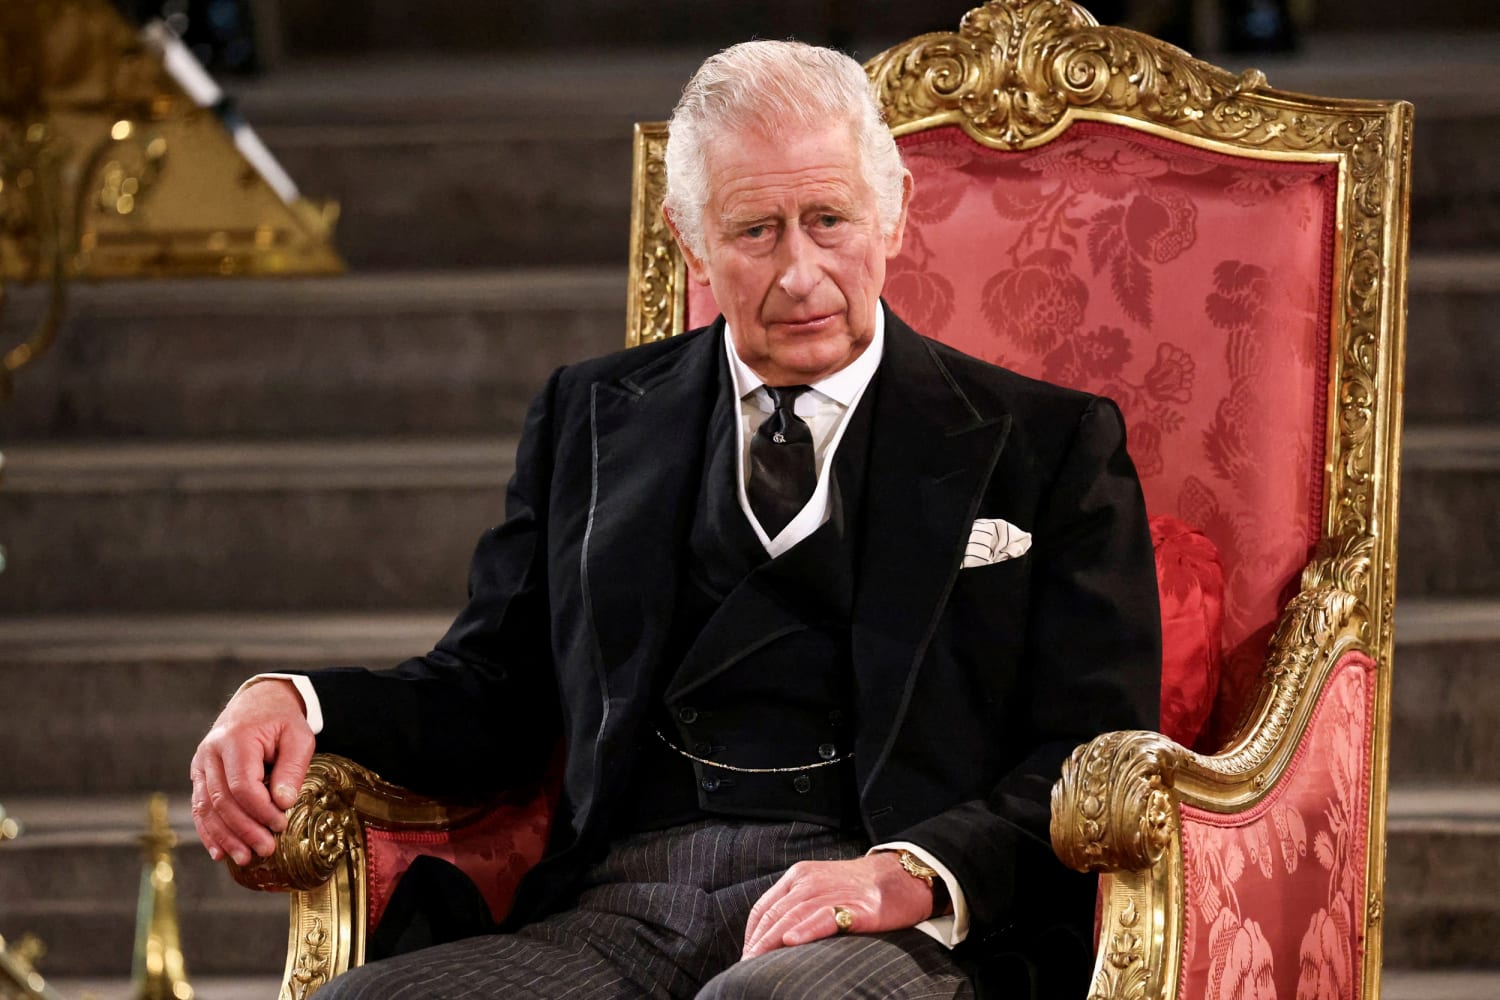 At 73, how will King Charles face the strain of being monarch?